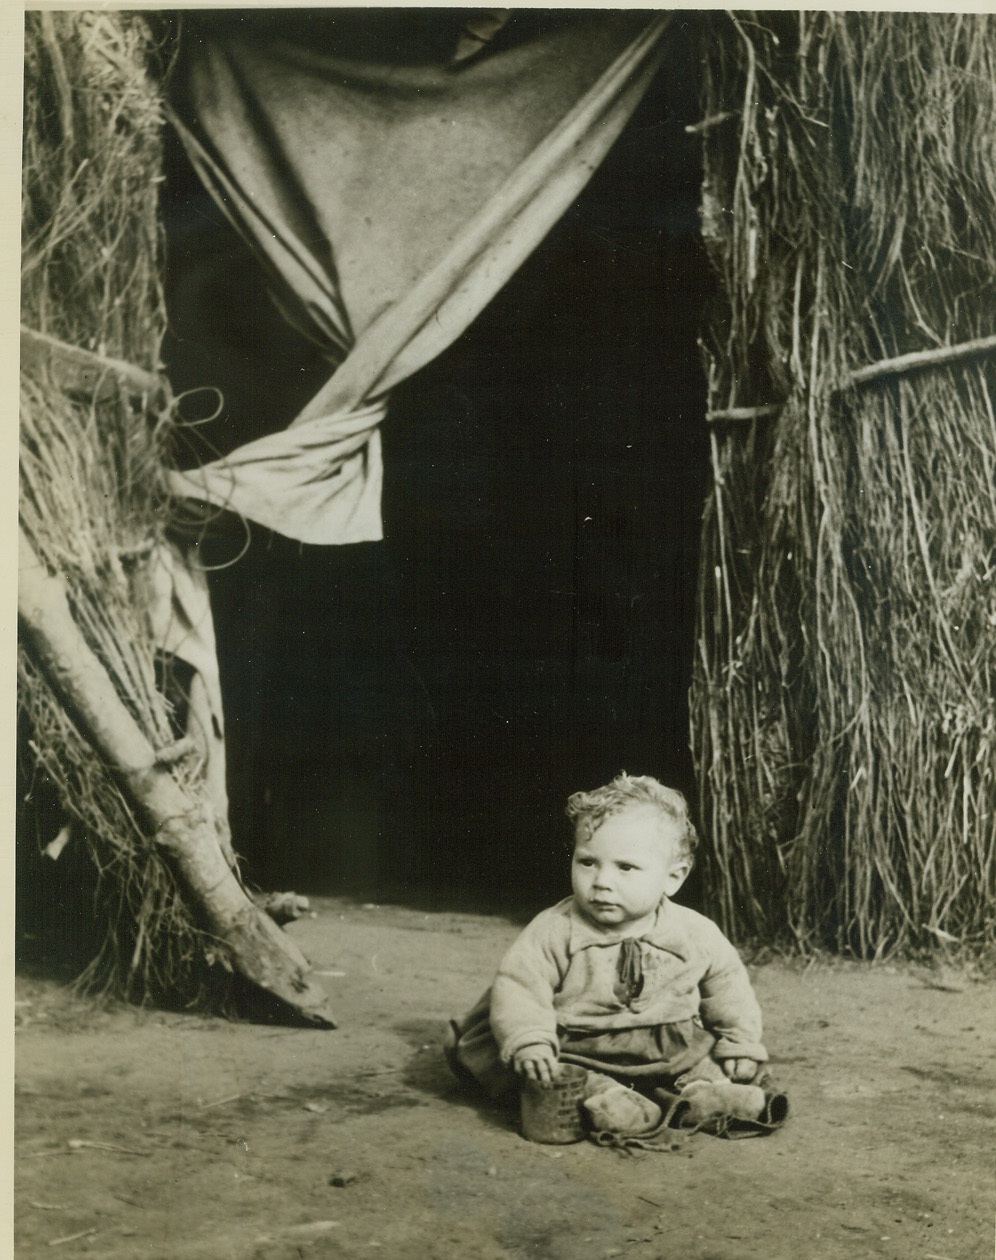 Grass Hut is Home to Him, 3/4/1944. Anzio, Italy – Playing quietly outside the entrance to the uncomfortable grass hut in which he and his folks live, this very young Italian boy is a member of one of many families left homeless when war came to Anzio. Their original home completely destroyed in the beachhead battle, the child’s family found refuge in the hut. Credit: (Official U.S. Navy Photo from ACME);